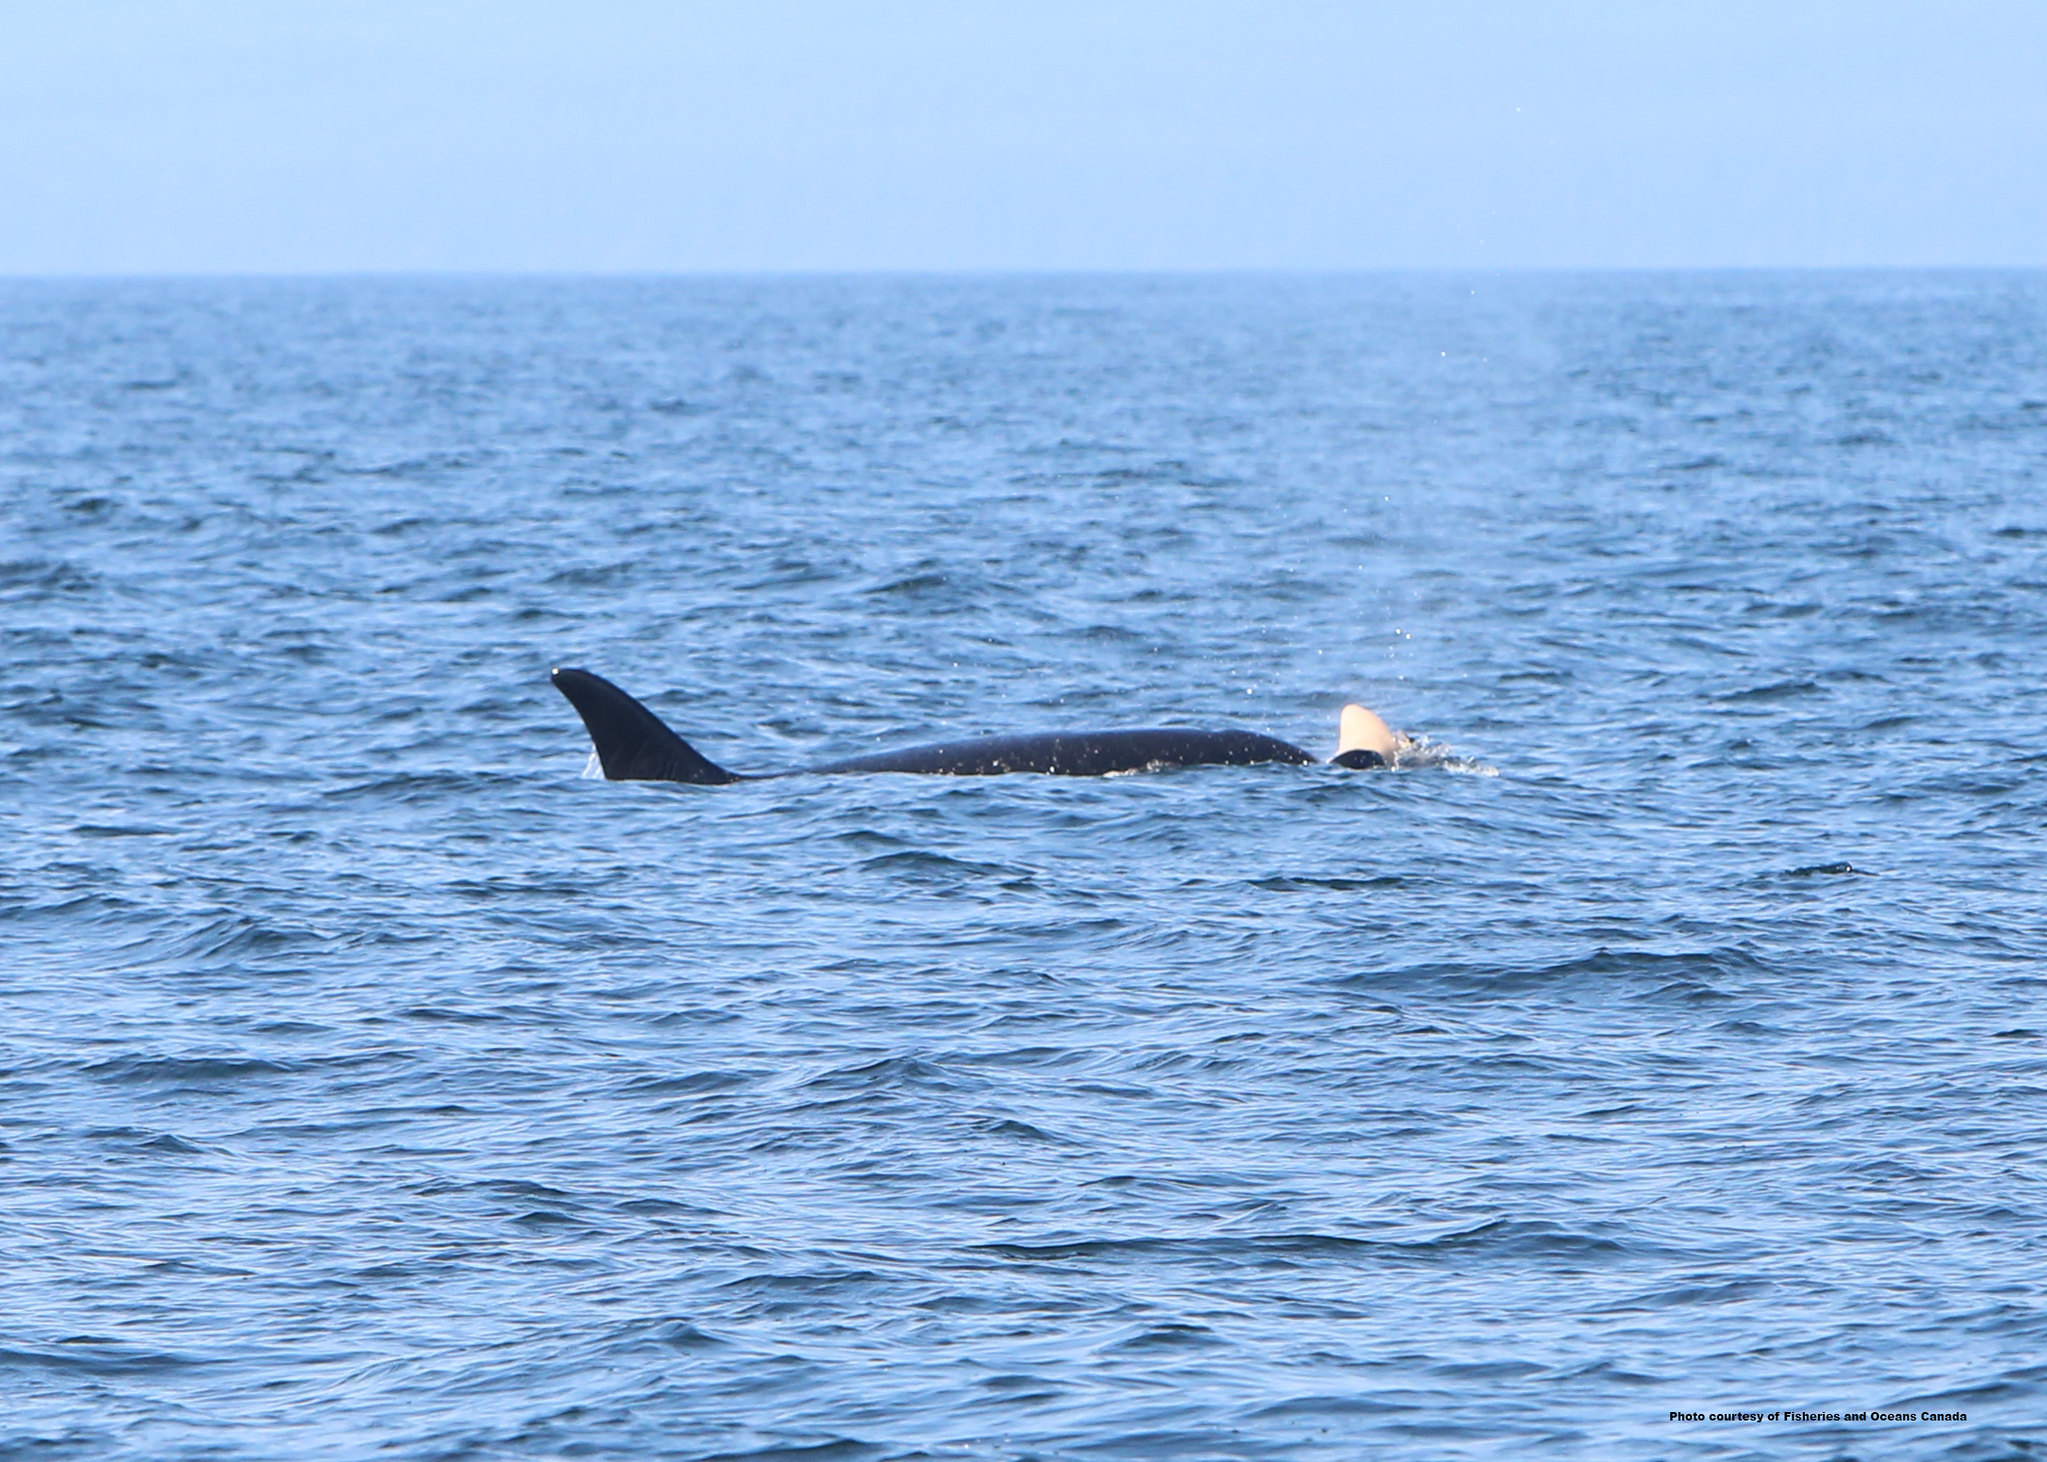 DFO photo of orca J35 known as Tahlequah pushing her calf on Aug. 8, 2018, off Cape Flattery, Wash. Photo by Sara Tavares, Fisheries and Oceans Canada. Attribution-NonCommercial-NoDerivs 2.0 Generic (CC BY-NC-ND 2.0)